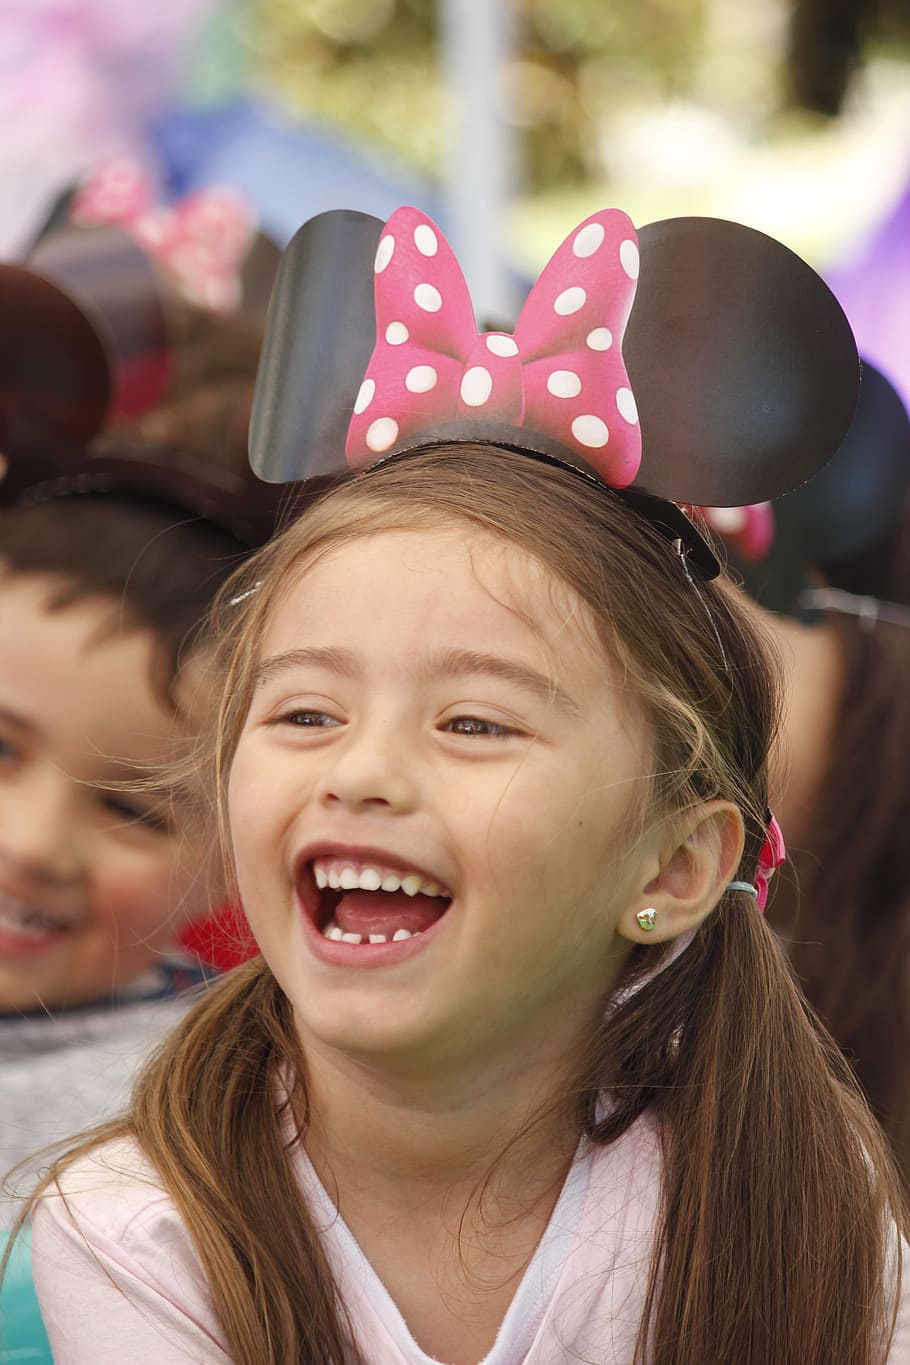 girl, smiling, party, children, latino, beautiful, innocence, purity, playing, laughter